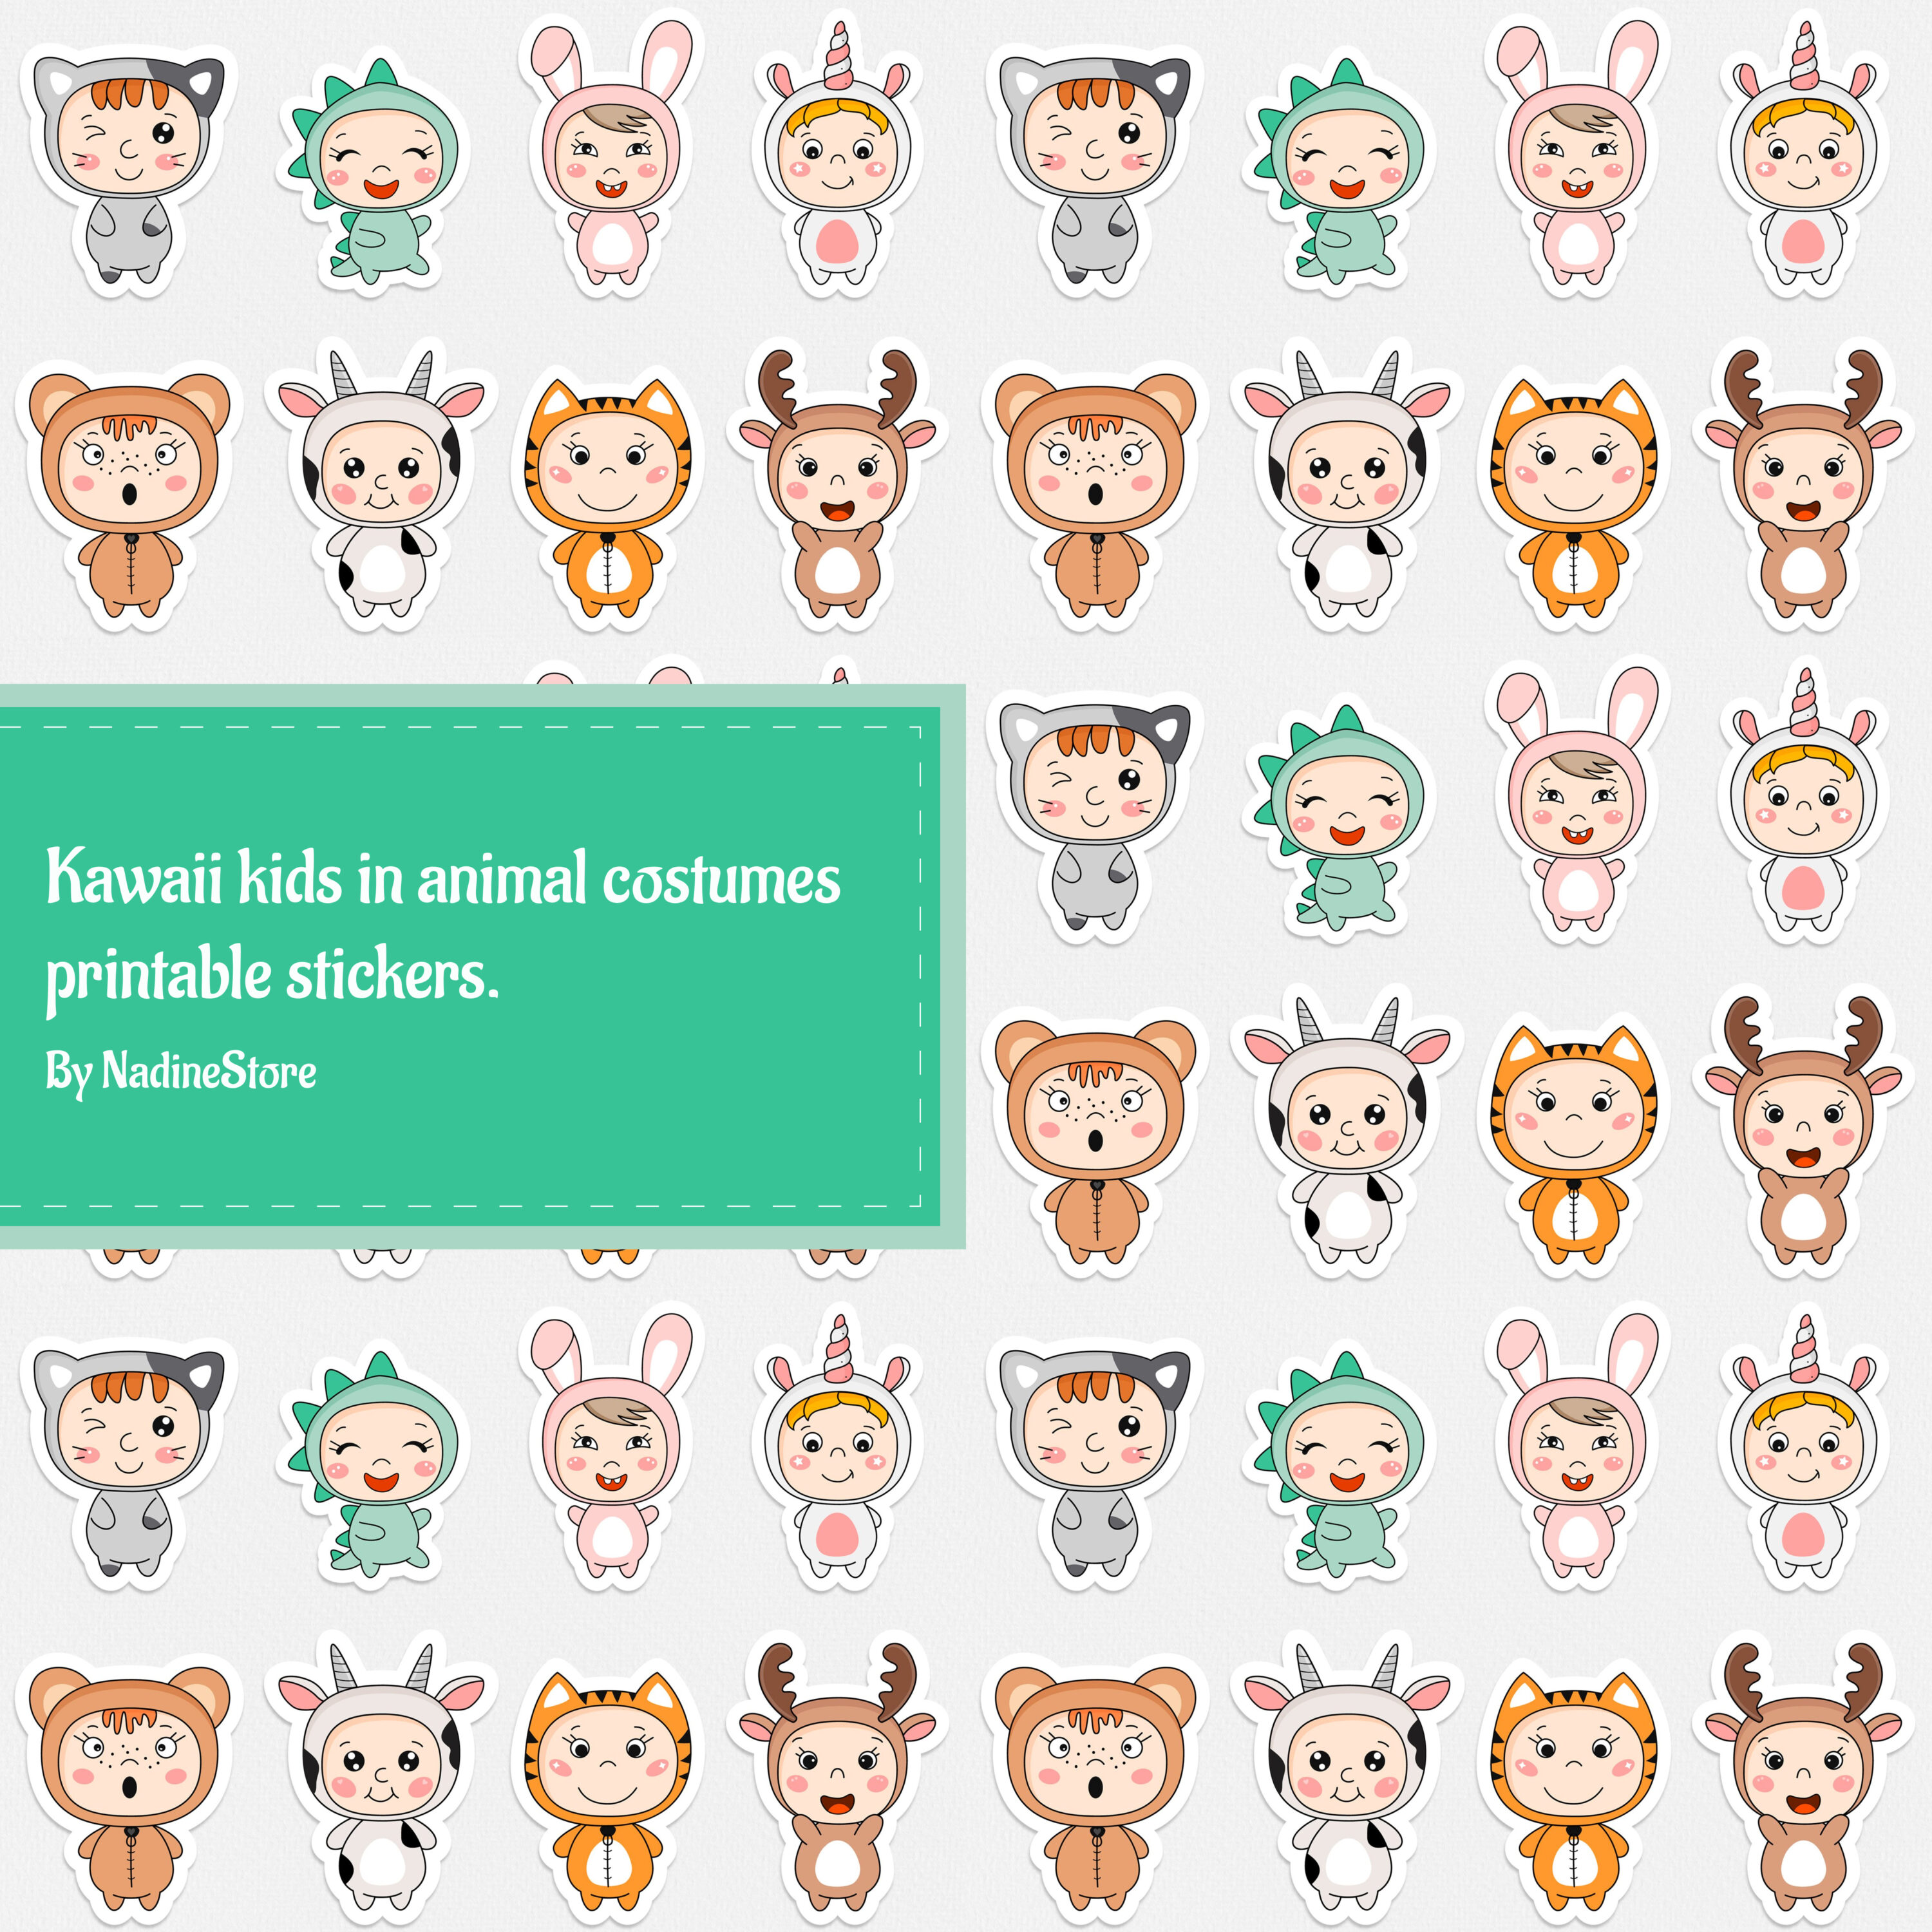 Kawaii kids in animal costumes printable stickers preview.